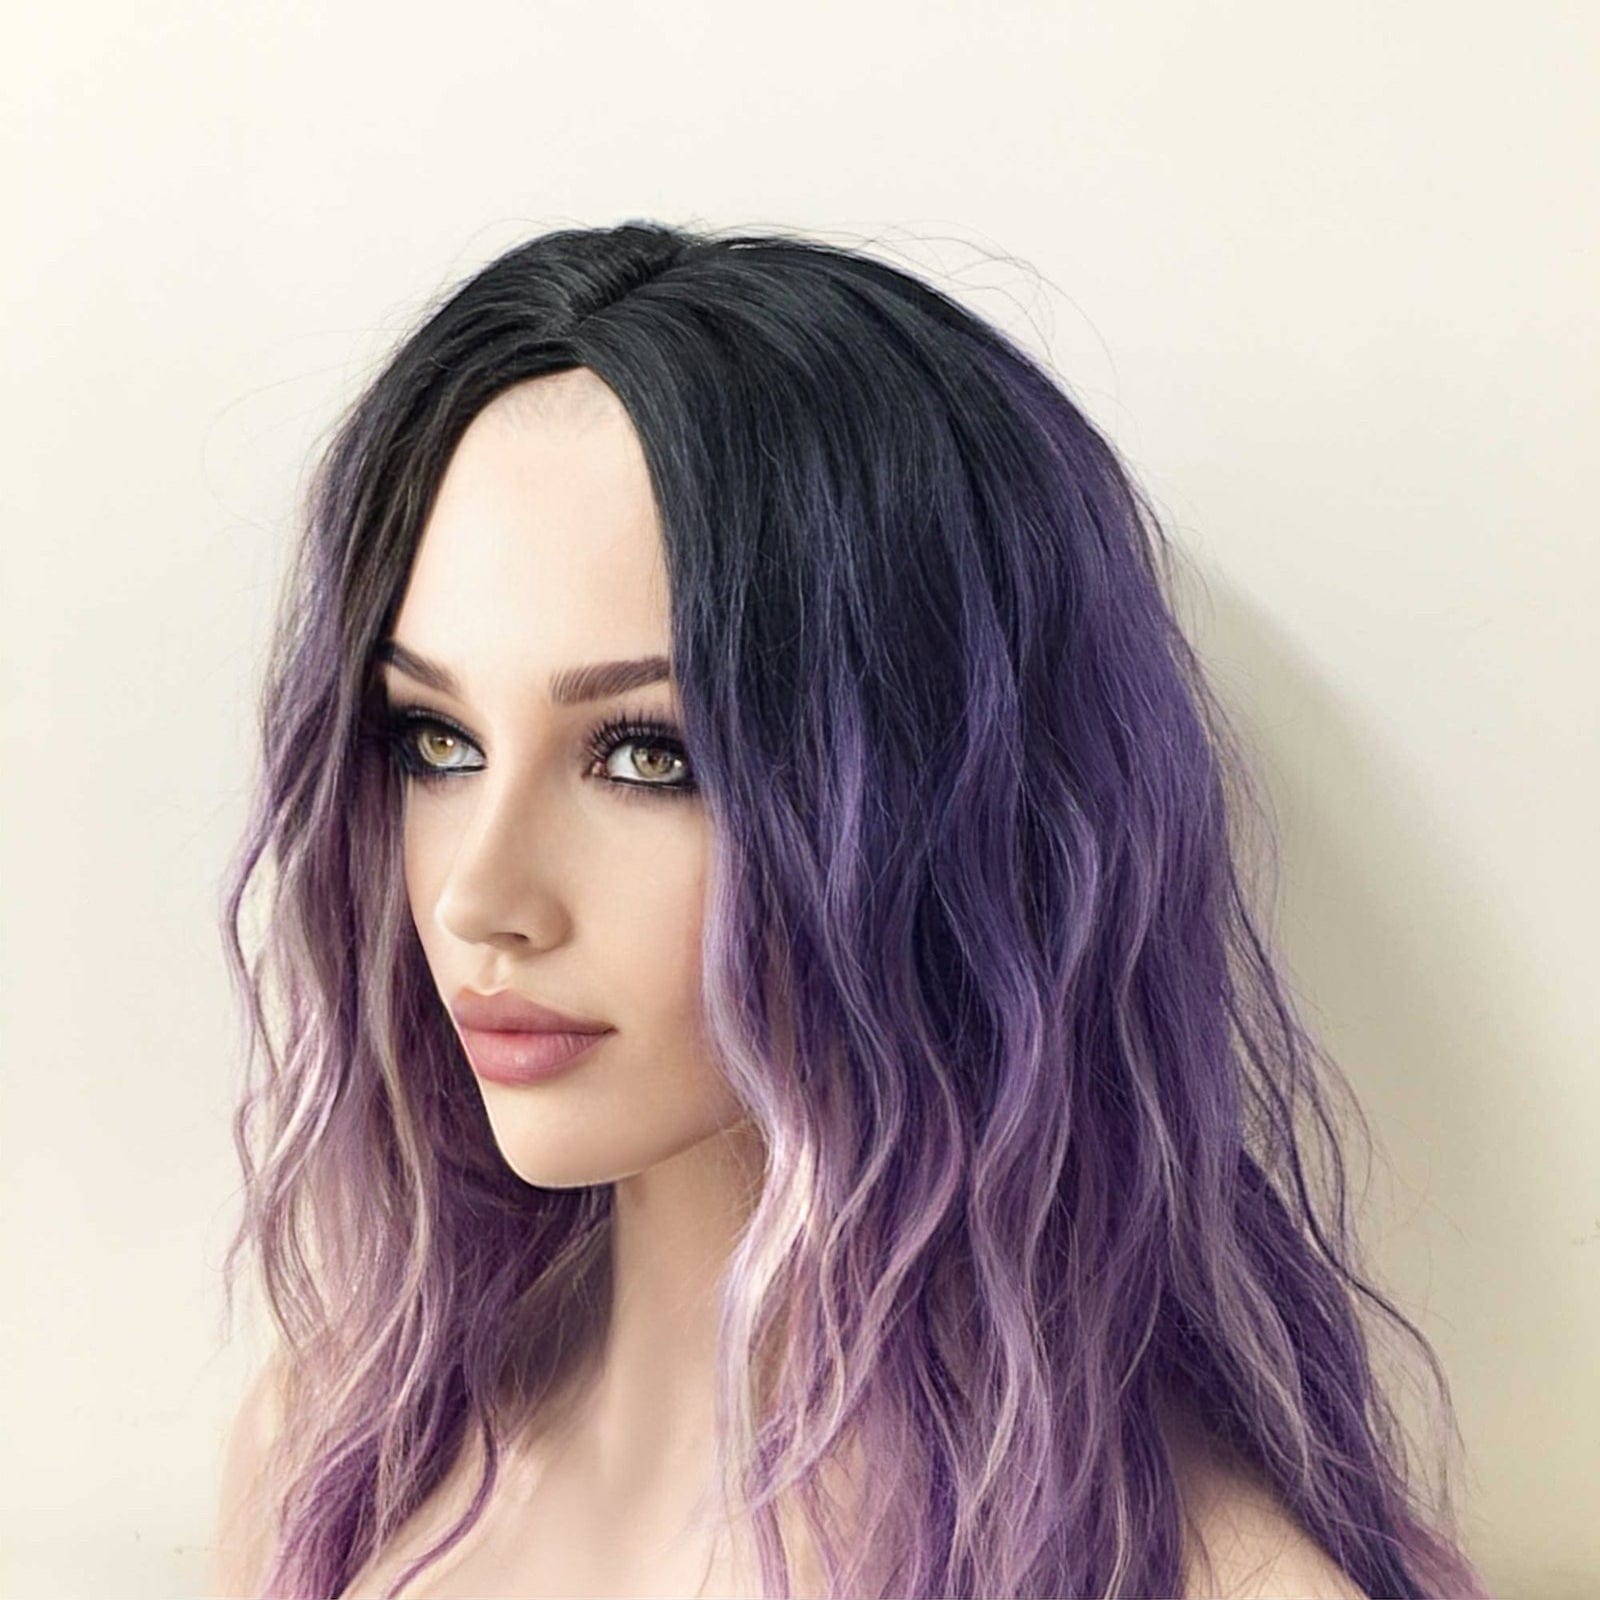 nevermindyrhead Women Purple Ombre Dark Root Long Curly Side Part Wig